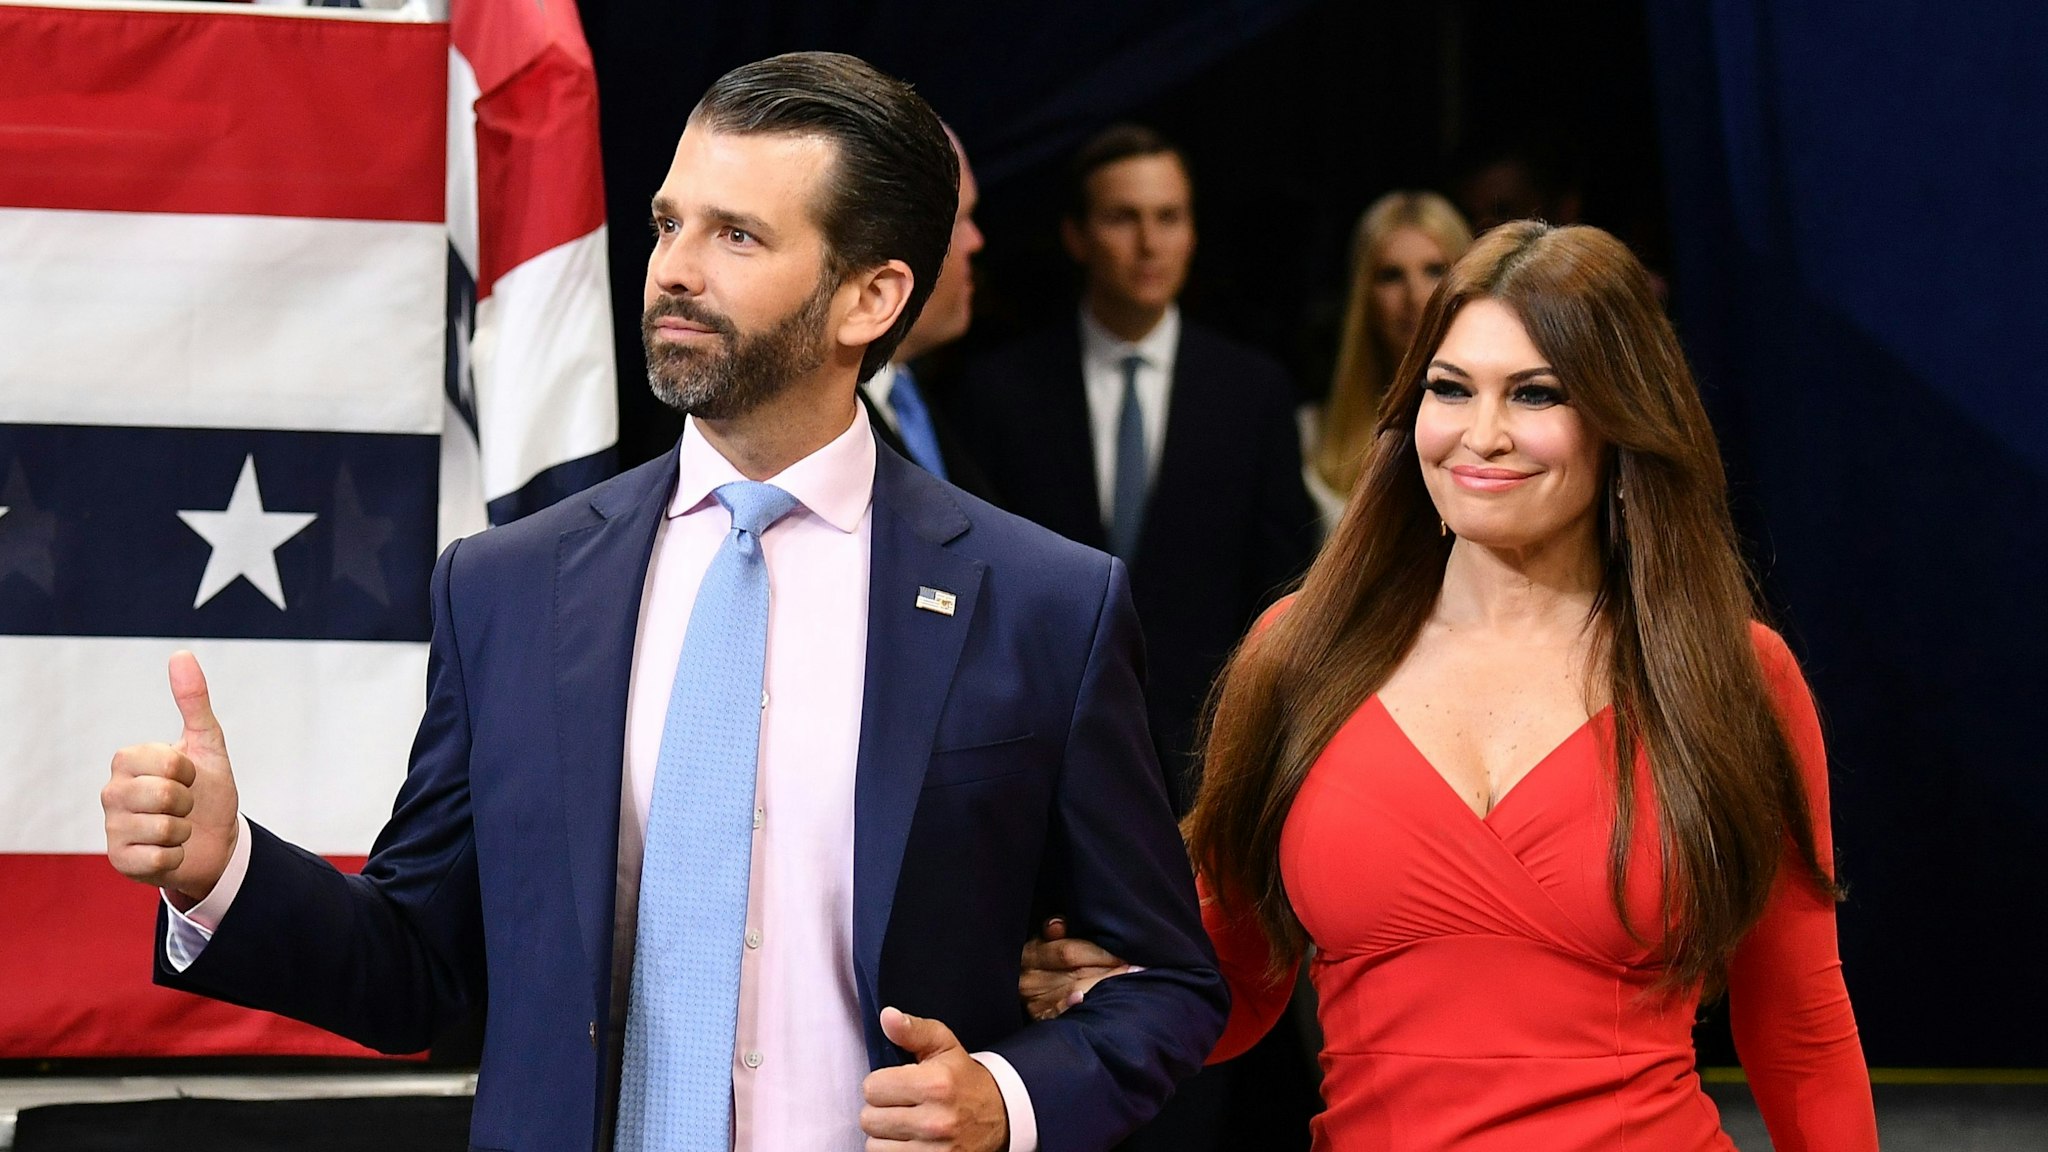 Kimberly Guilfoyle (R) and Donald Trump Jr. arrive at a rally for US President Donald Trump, to officially launch the Trump 2020 campaign, at the Amway Center in Orlando, Florida on June 18, 2019. - Trump kicks off his reelection campaign at what promised to be a rollicking evening rally in Orlando.